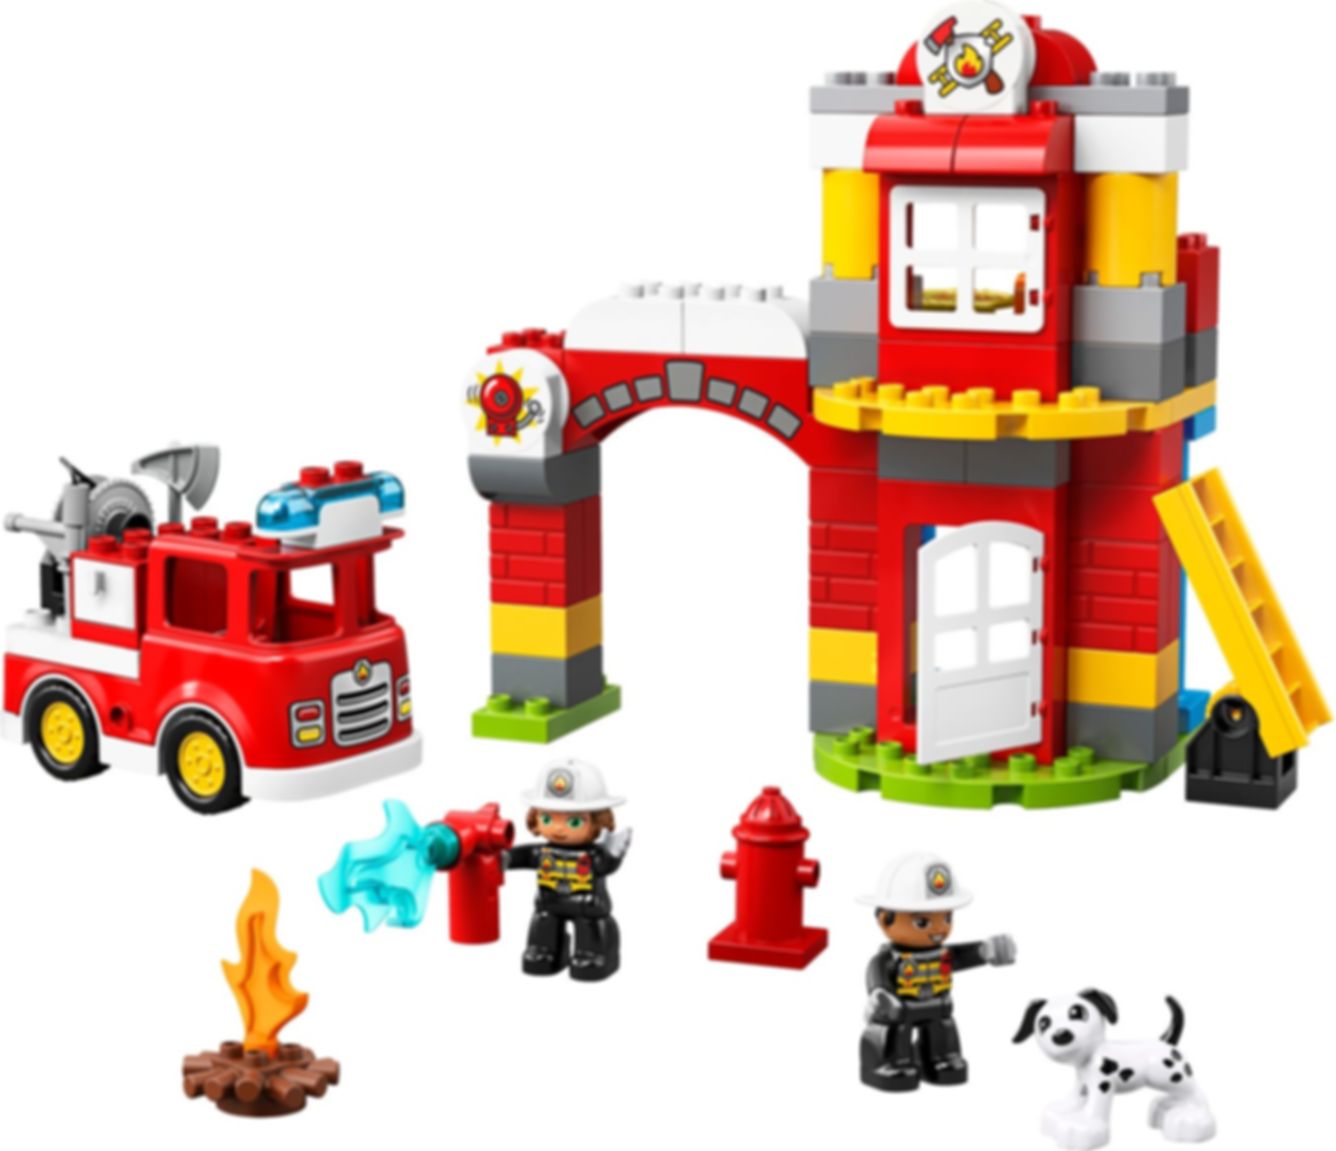 LEGO® DUPLO® Fire Station components